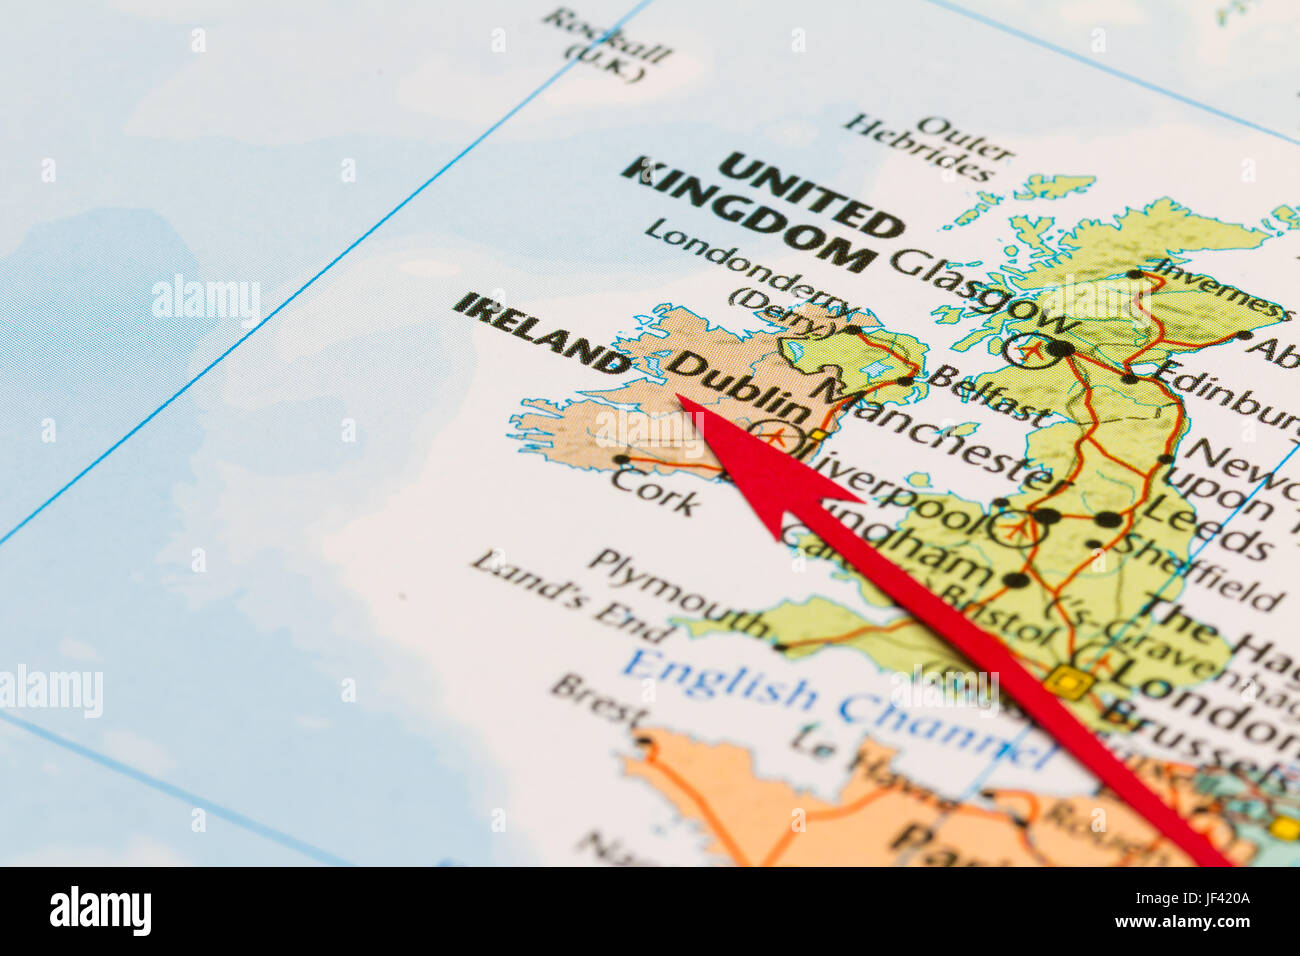 Photo of Republic of Ireland. Country indicated by red arrow. Country on European continent. Stock Photo